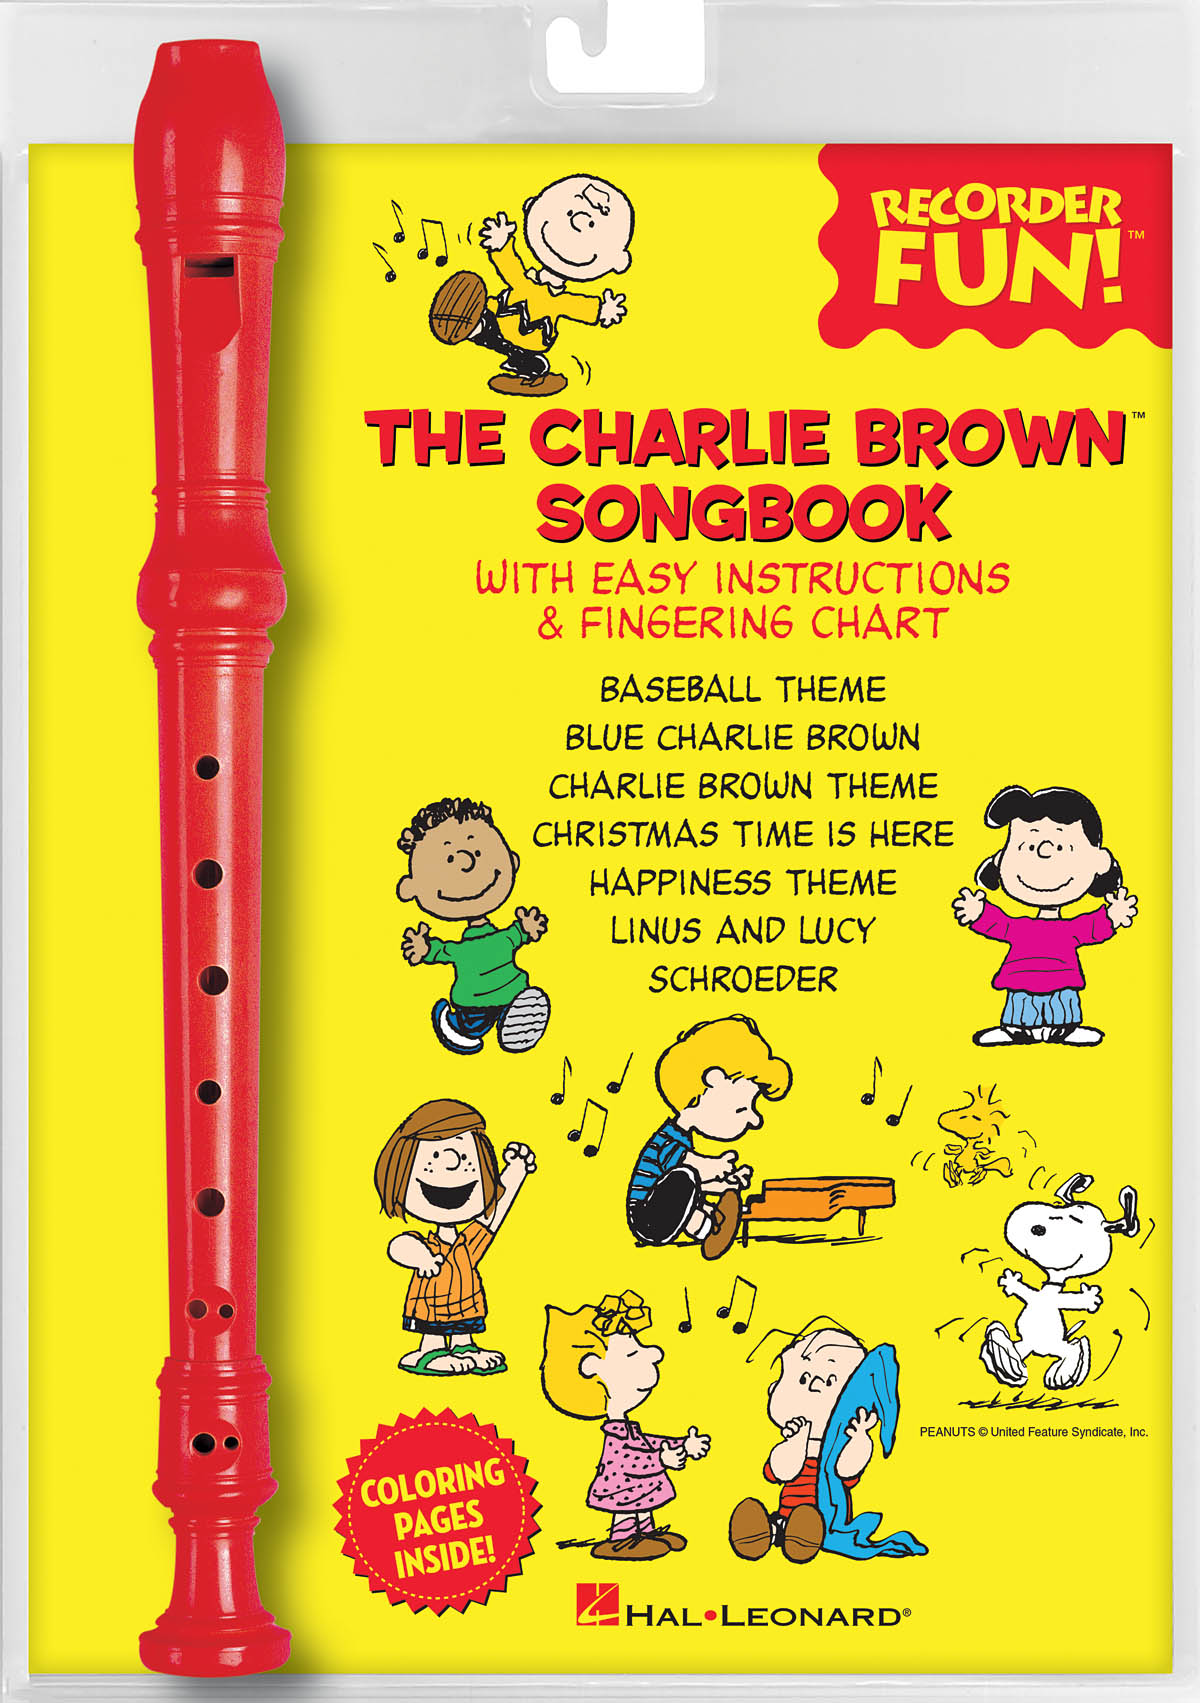 The Charlie Brown(TM) Songbook - Recorder Fun! - Book/Recorder Pack skladby pro zobcovou flétnu